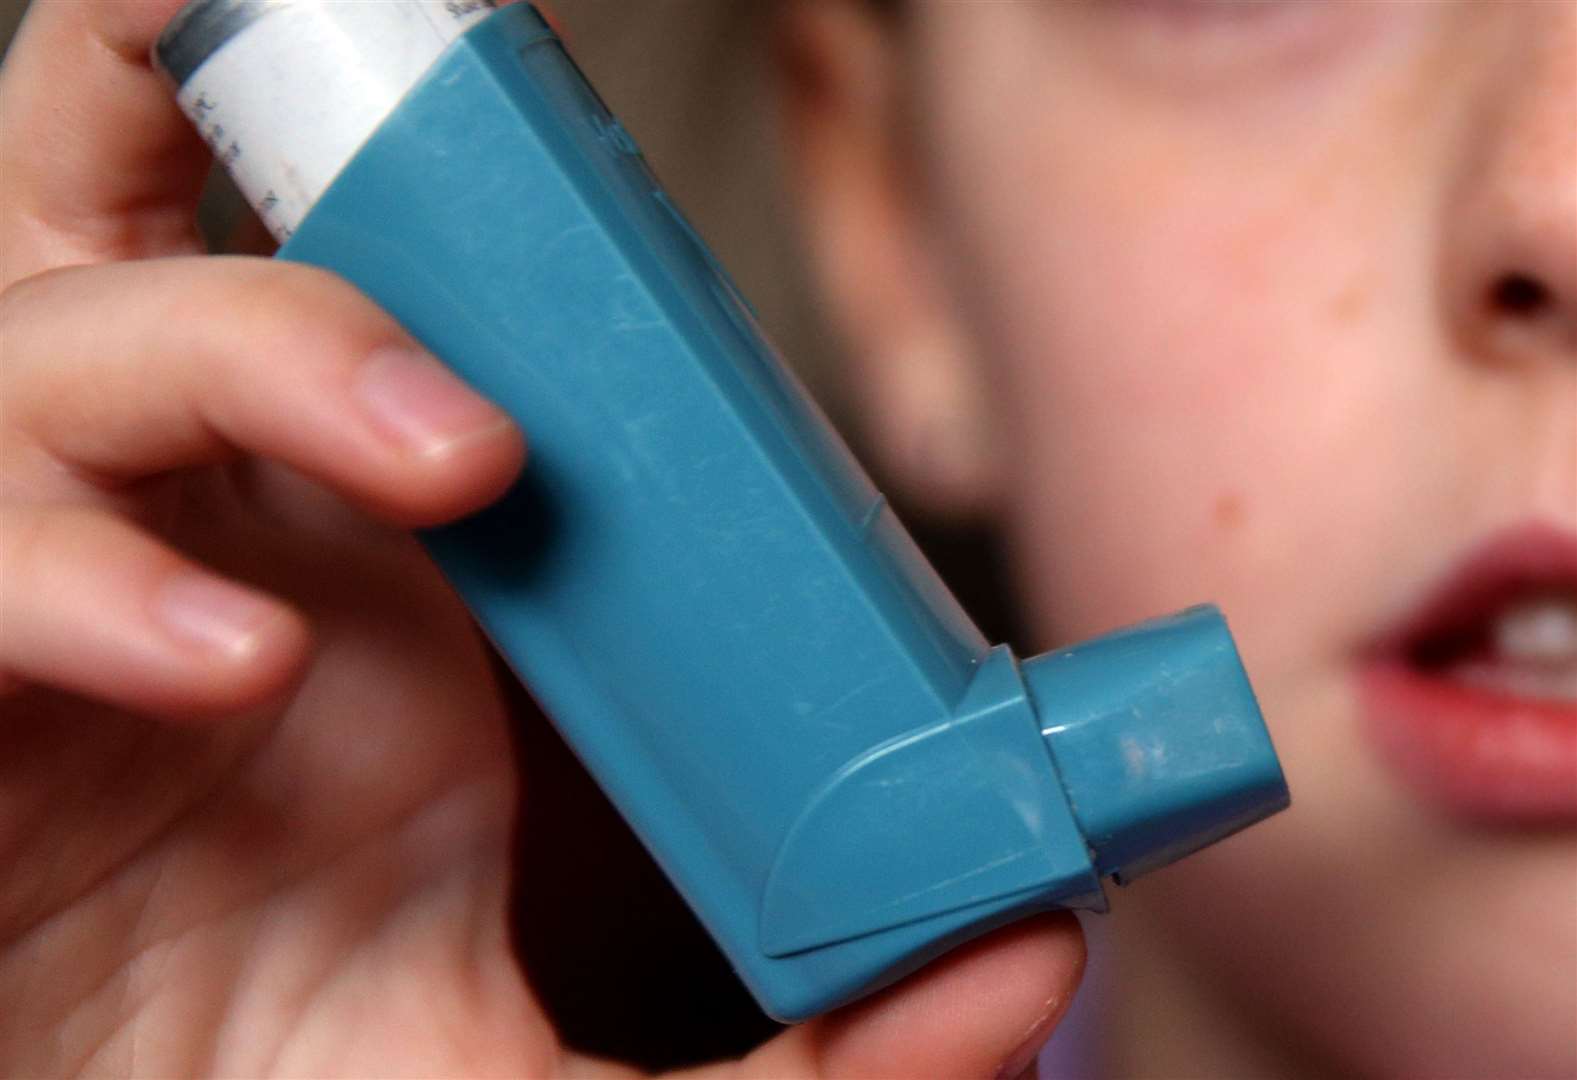 Asthma UK says that asthmatics can suffer more when pollen levels are high